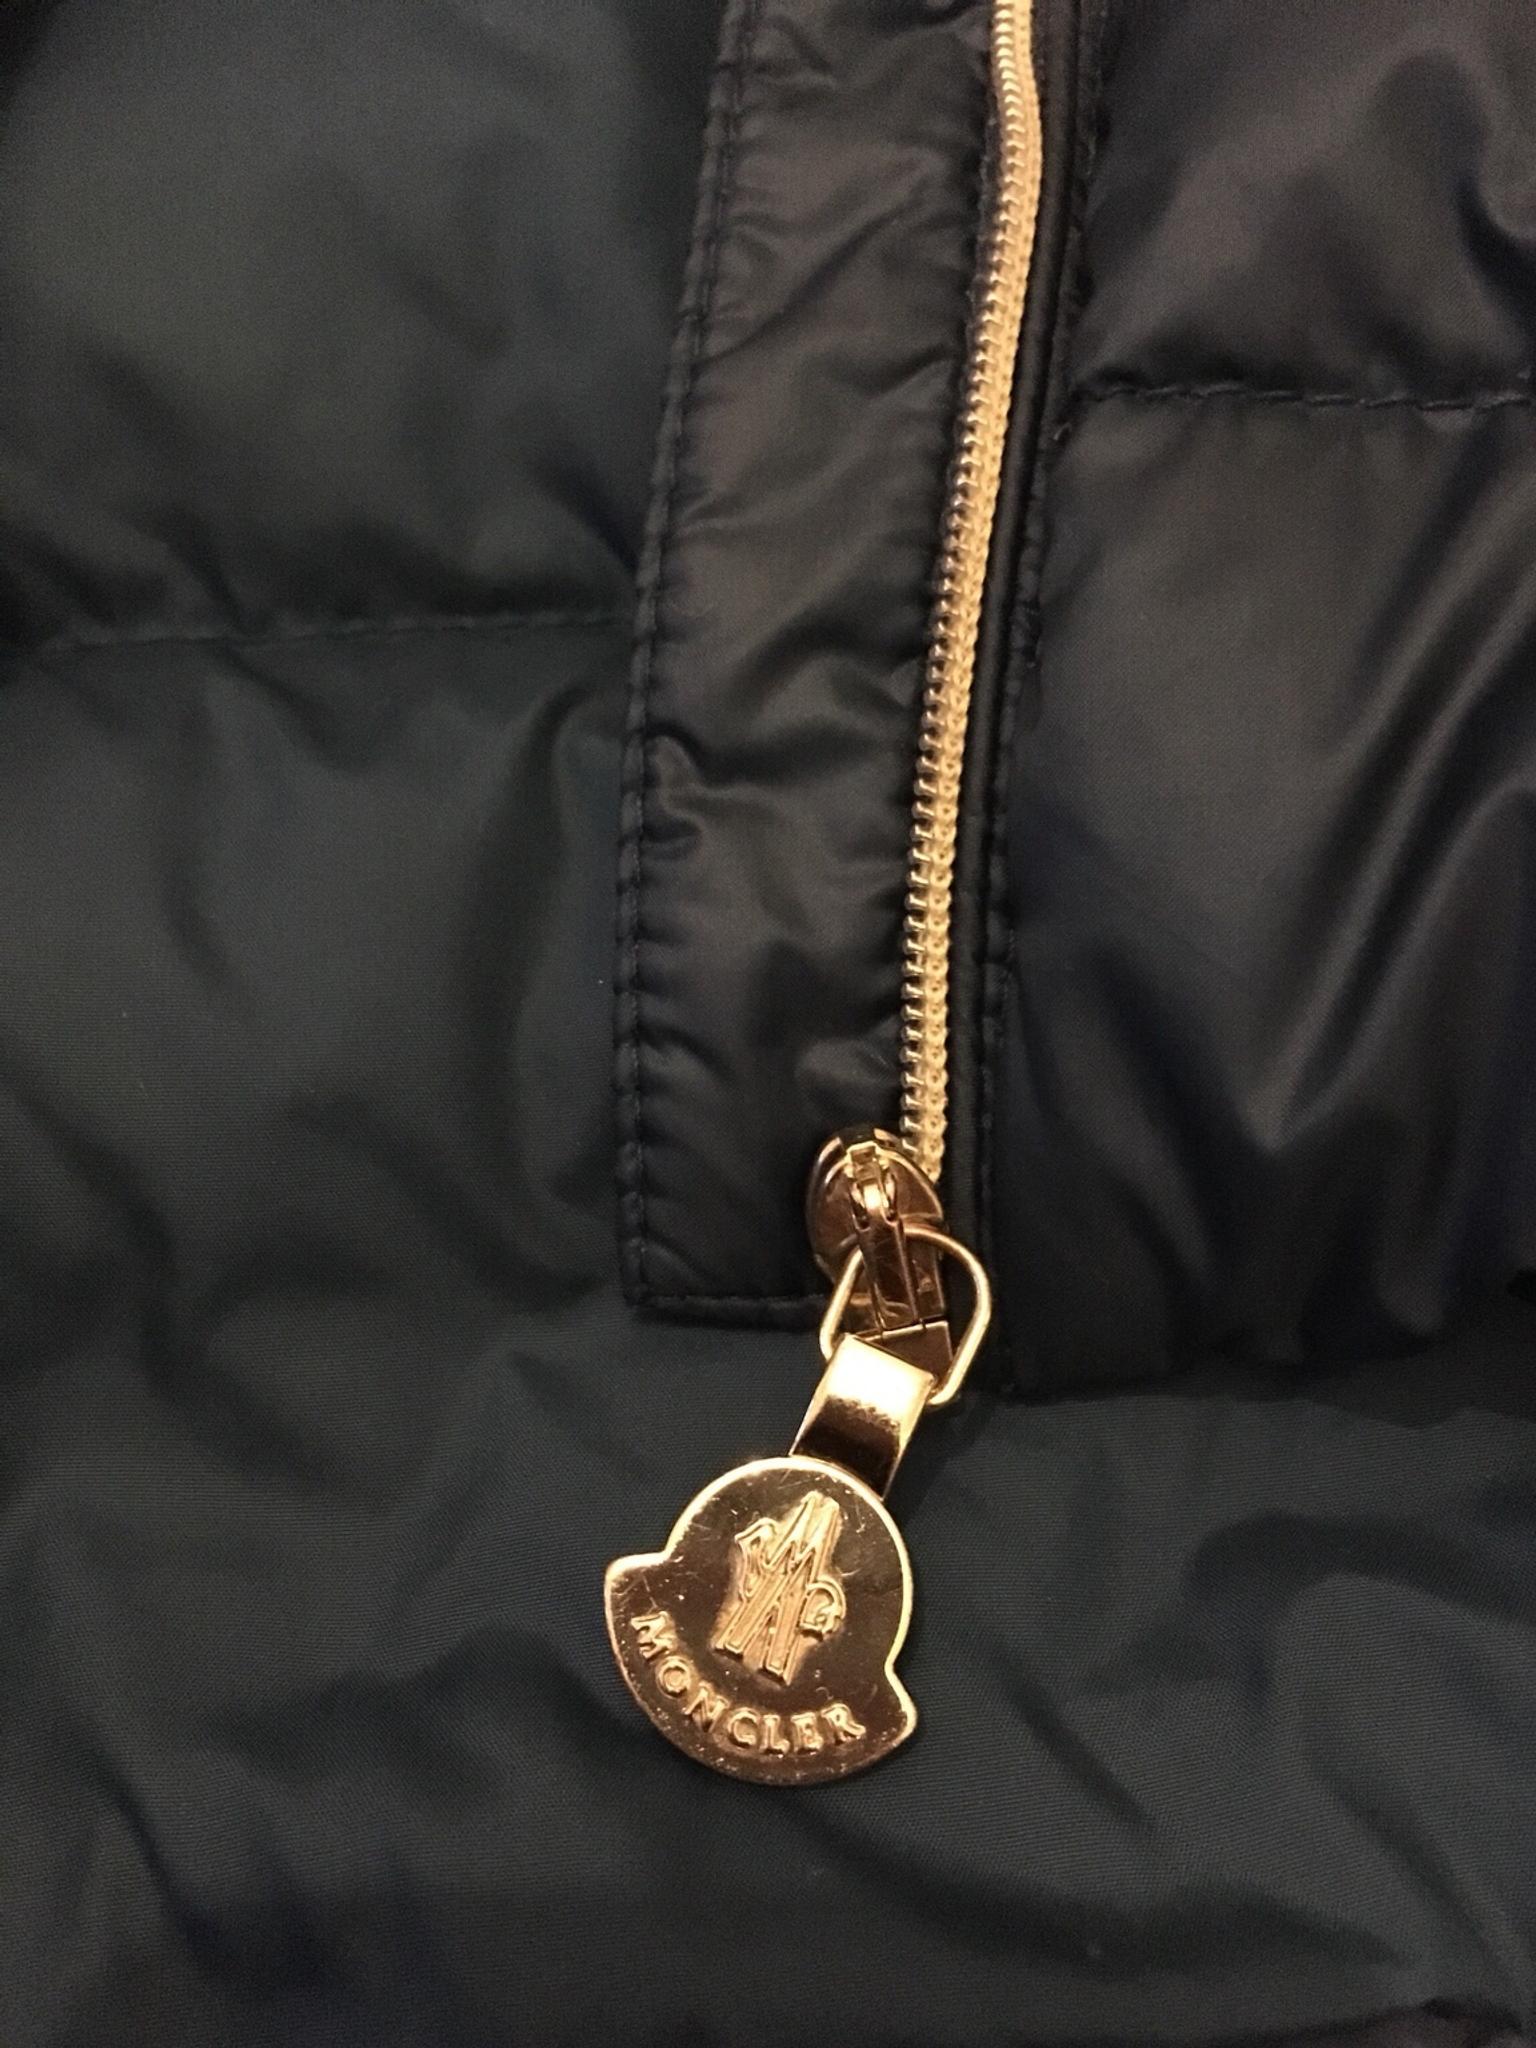 moncler solaire puffer coat